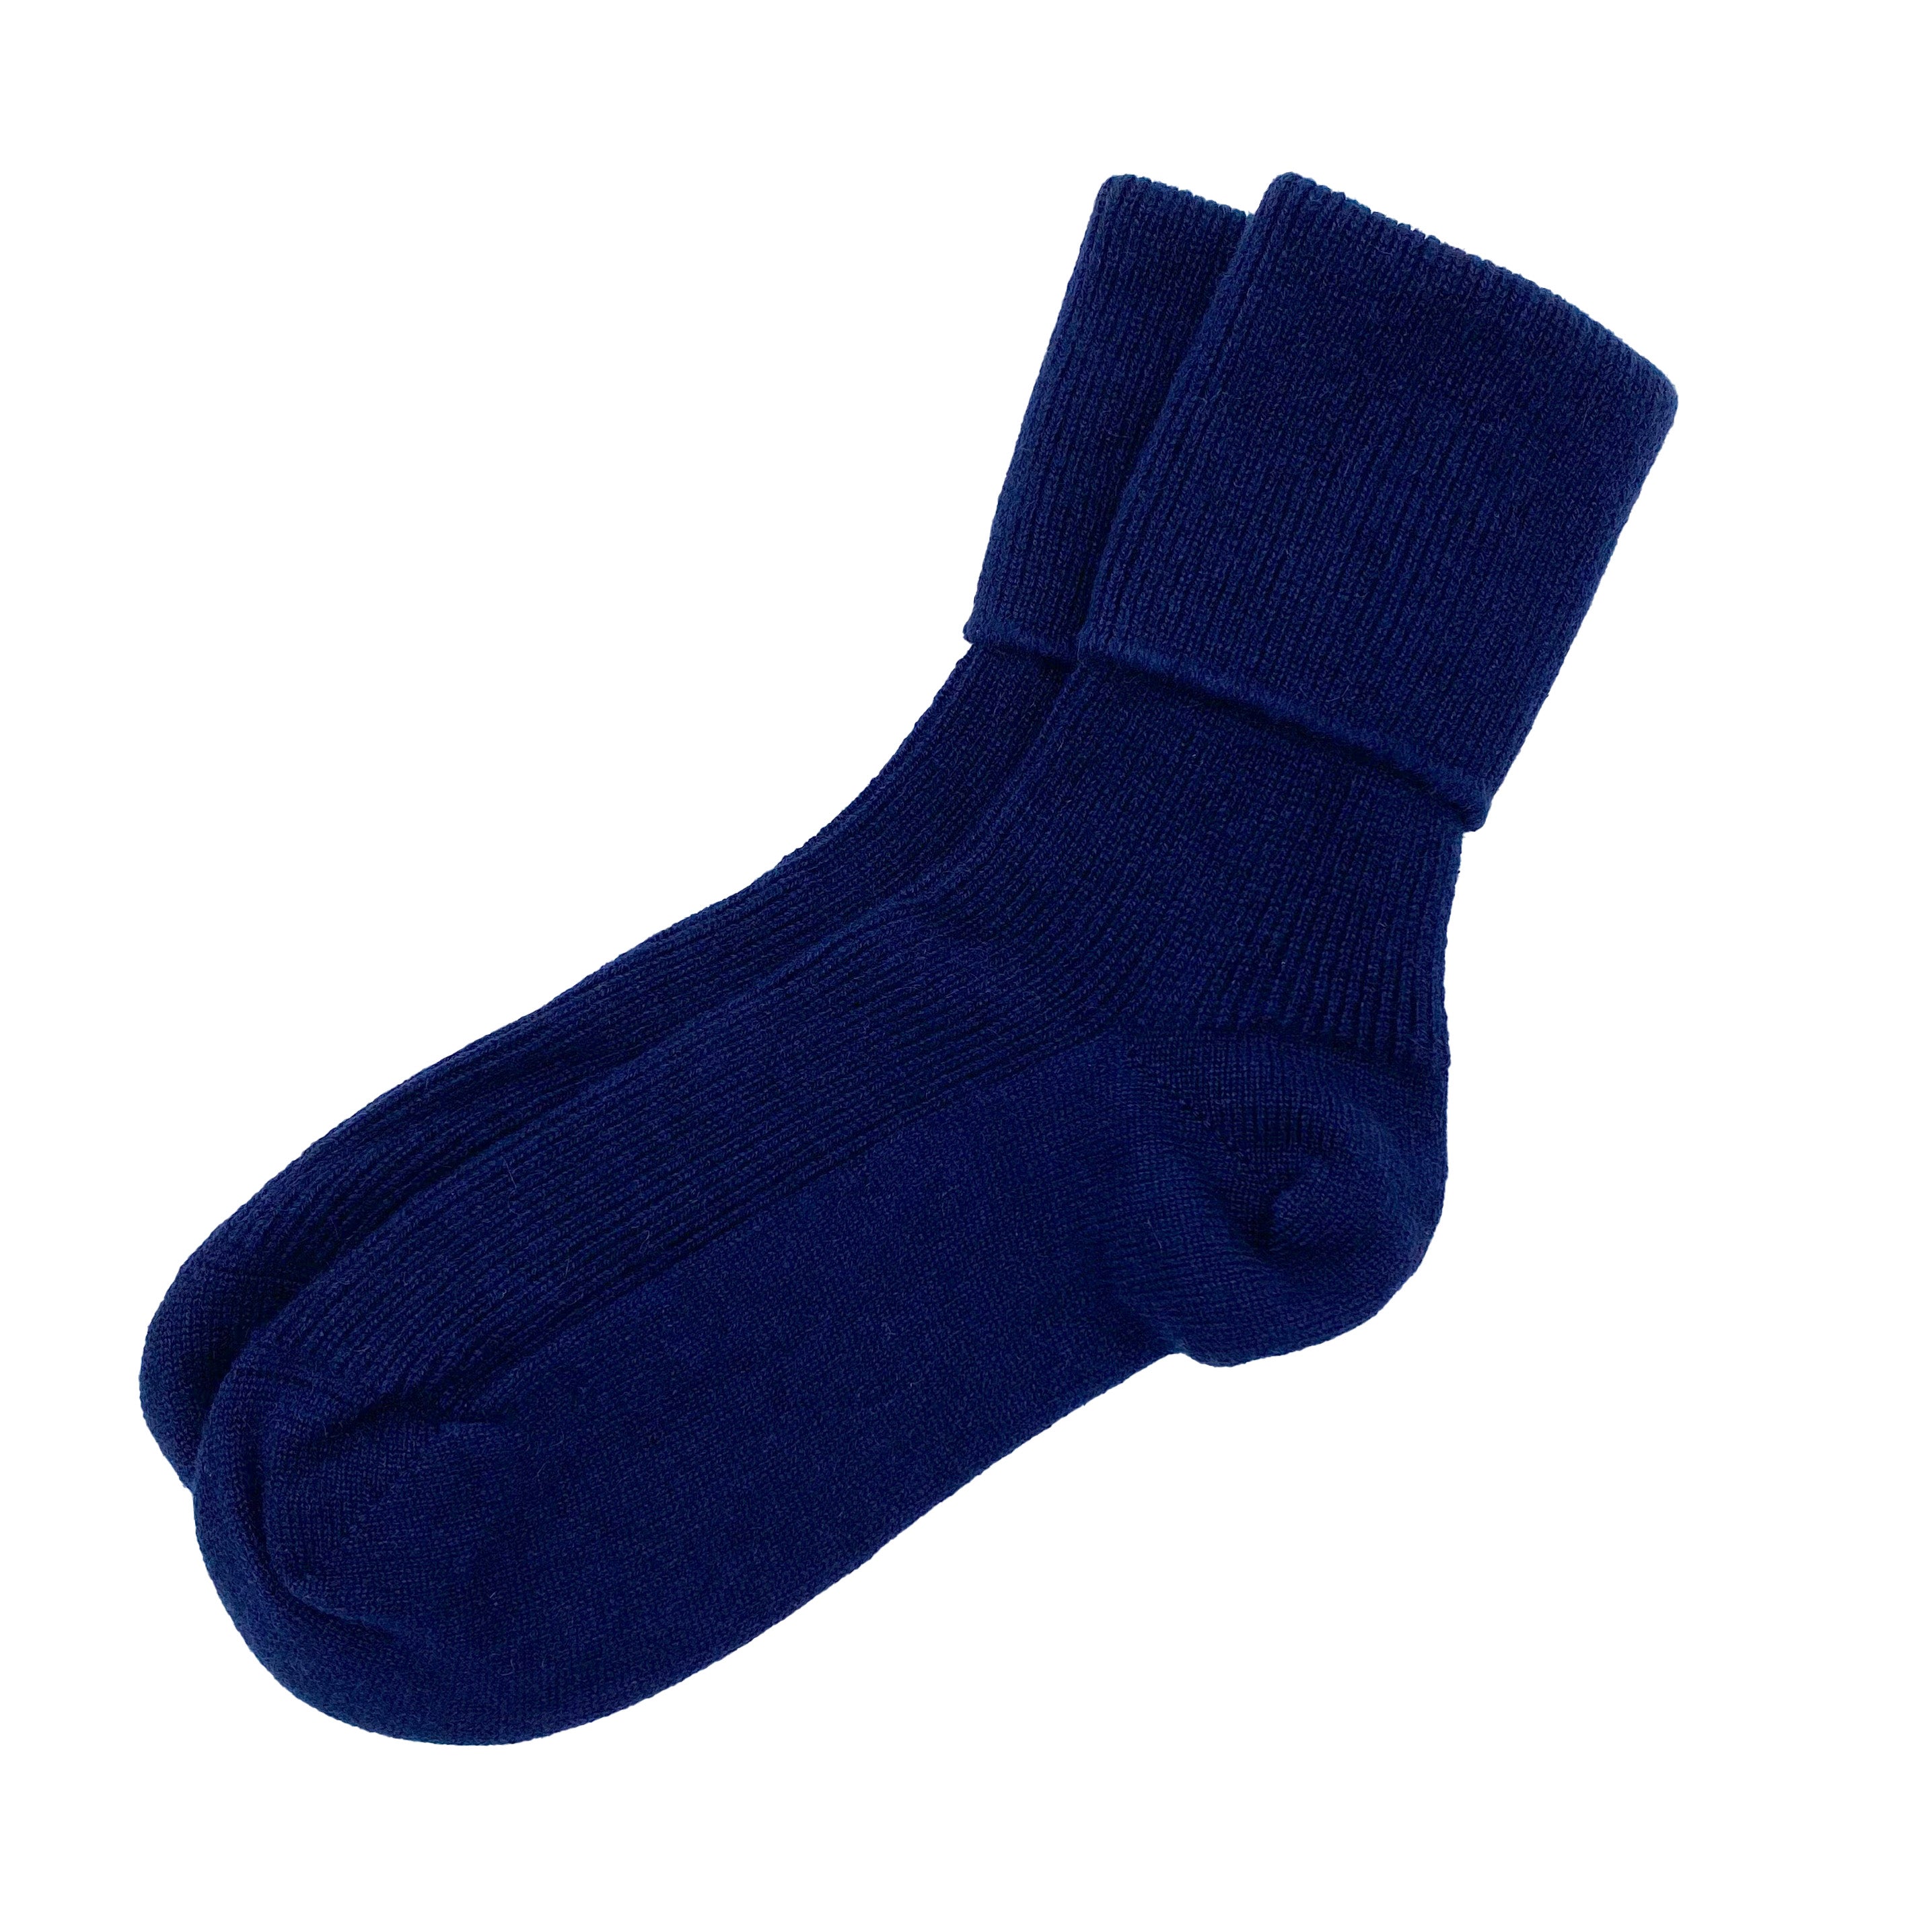 Women's Navy Pure Cashmere Wool Bed Socks, Made in Scotland by Ava Innes, UK